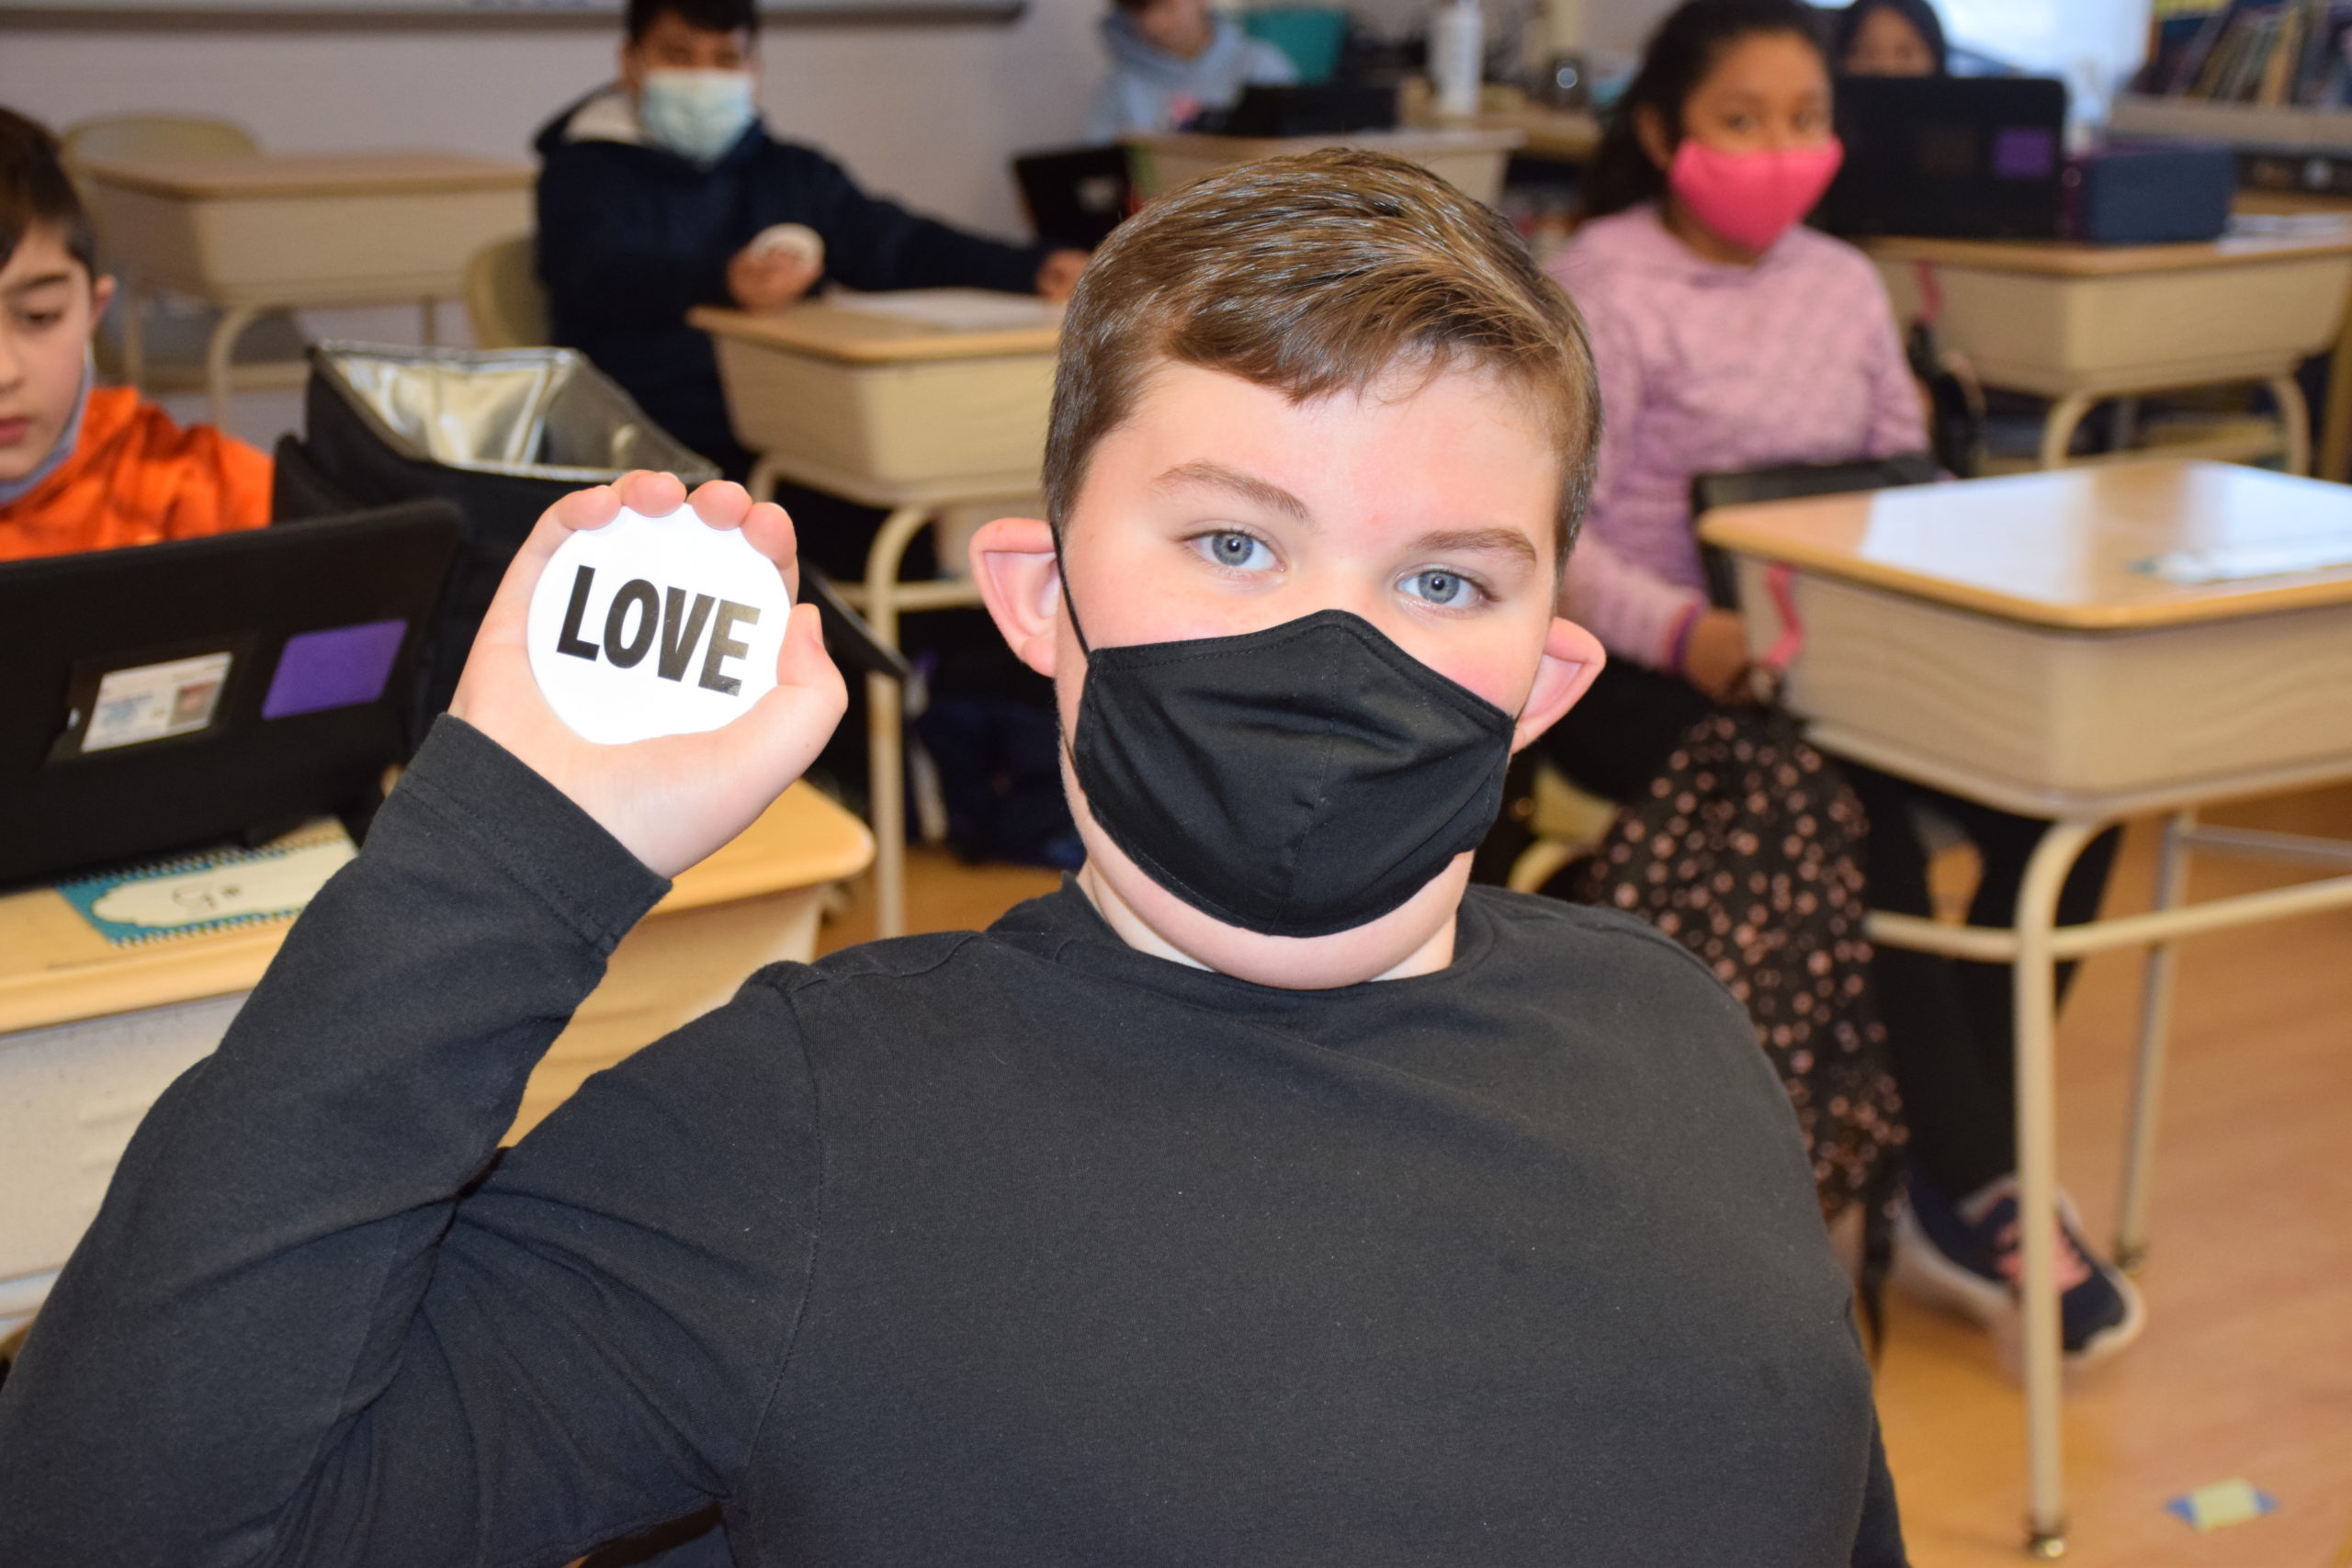 Hampton Bays Middle School students participated in P.S. I Love You Day on February 12.